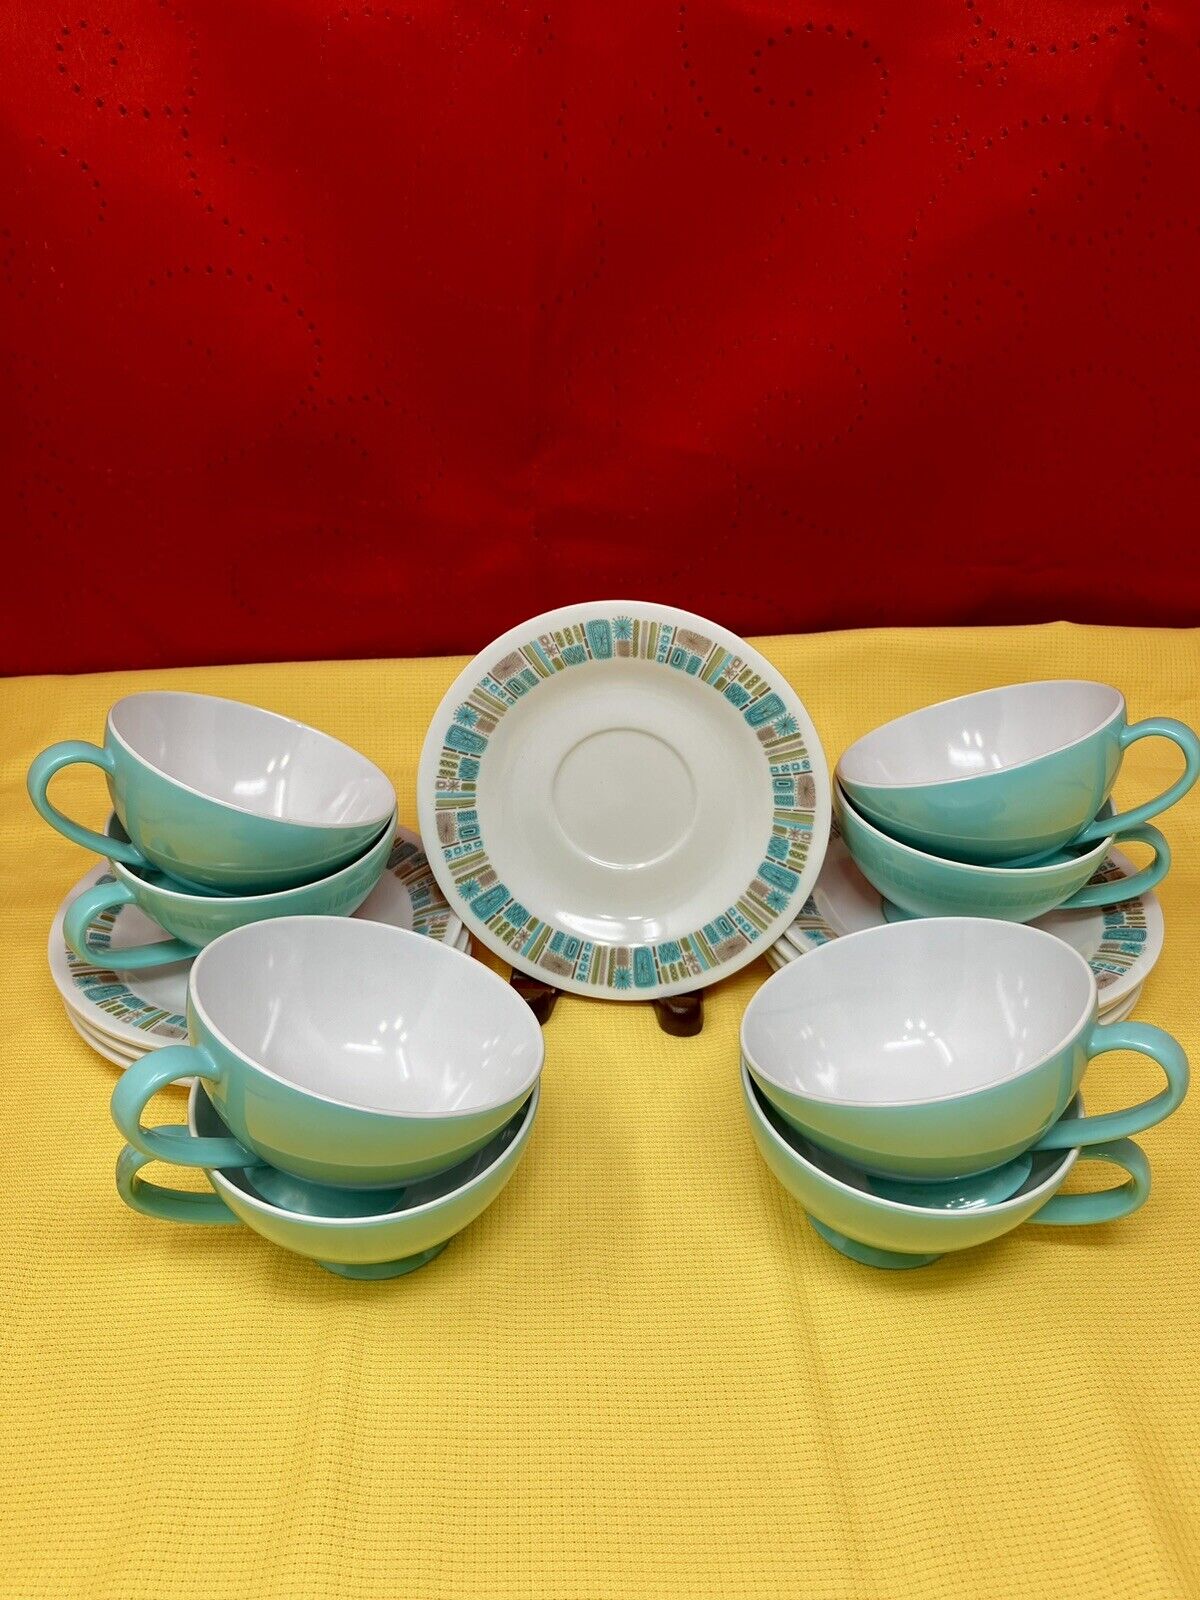 Vintage Texas Ware Turquoise Melmac Atomic Cup And Saucers Retro 8 piece